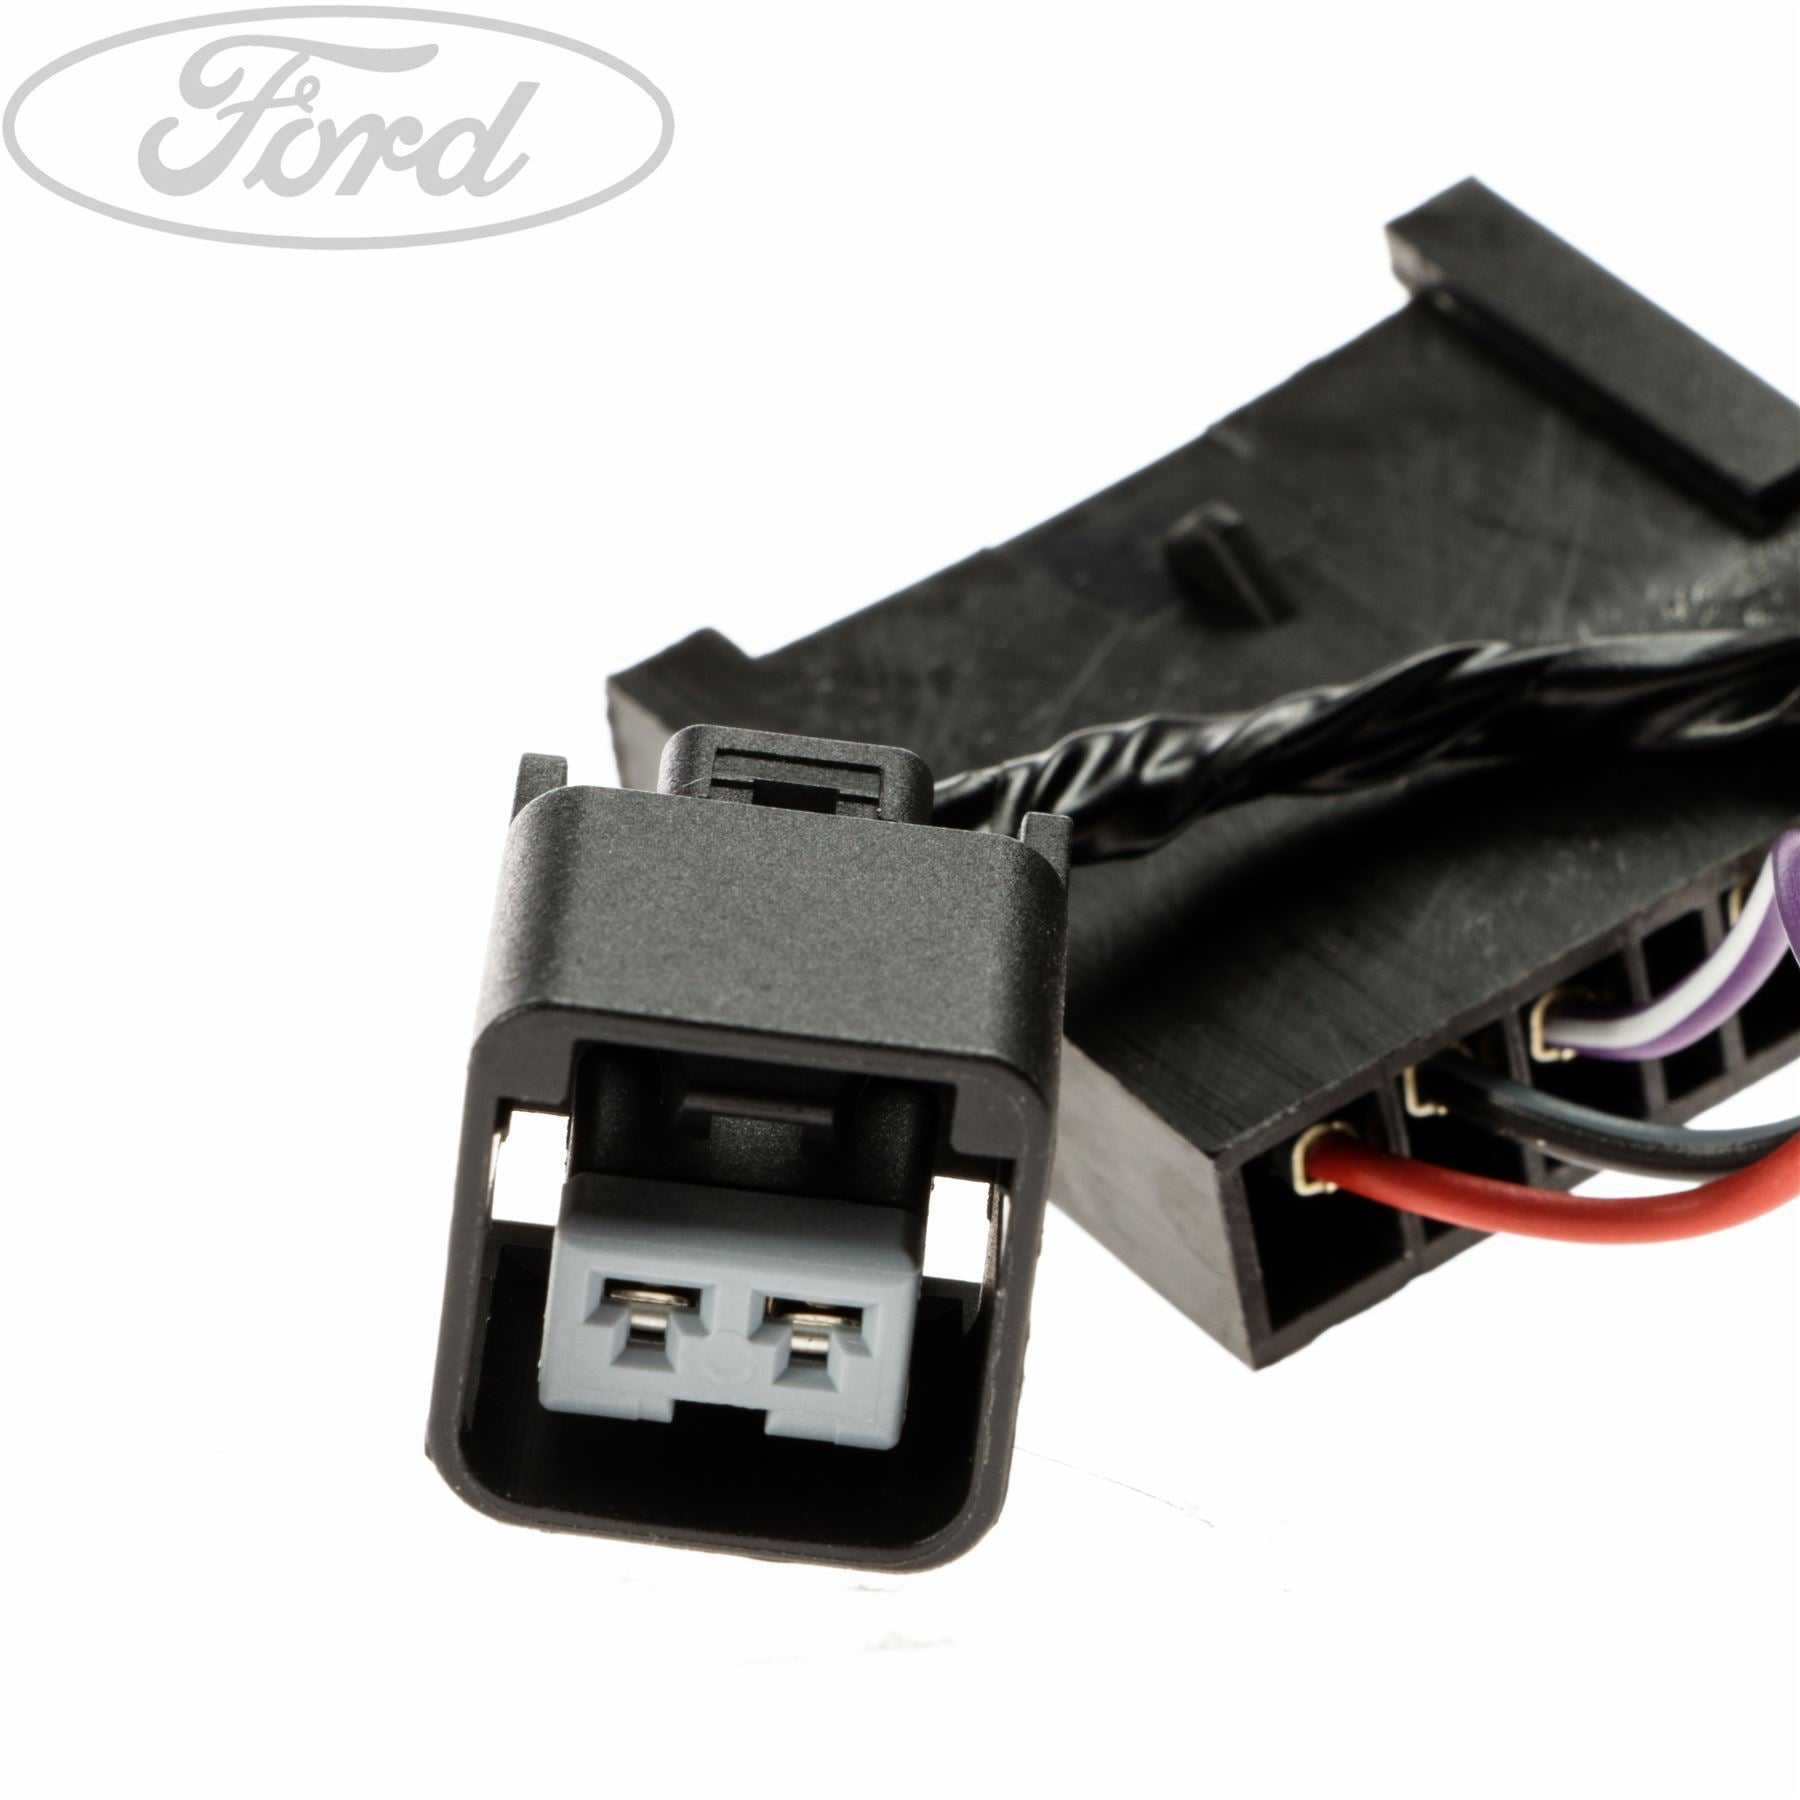 Ford, TRANSIT BACK DOOR BODY CLOSURE WIRING